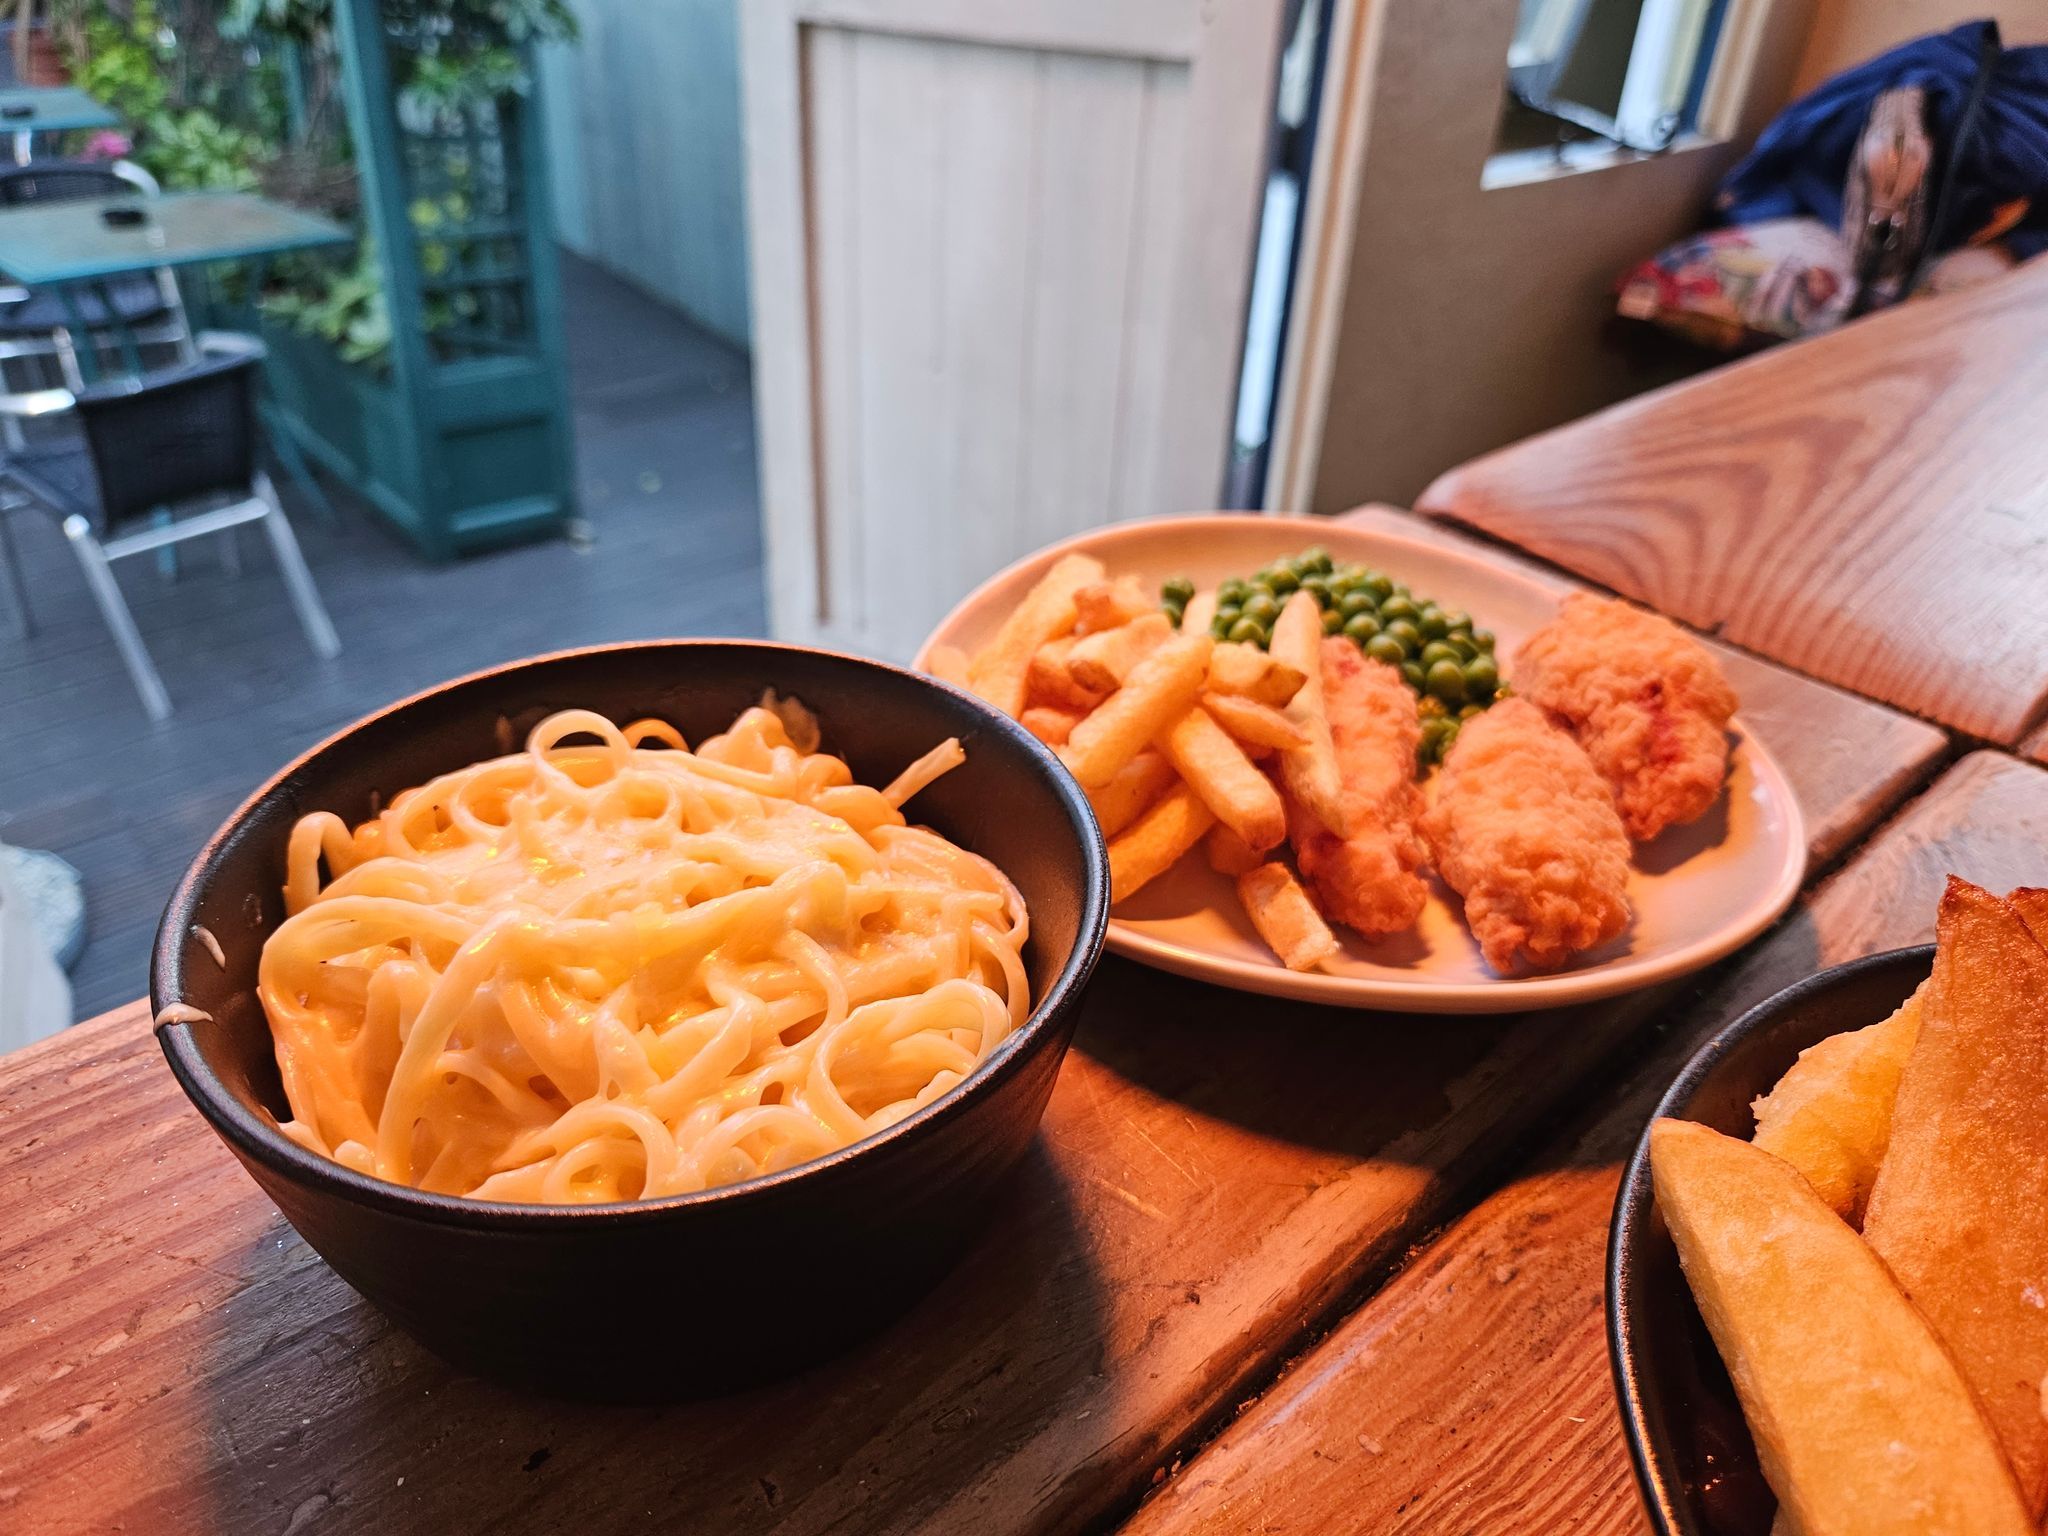 creamy cheese pasta In the black bow and fried chicken and fries on the white table